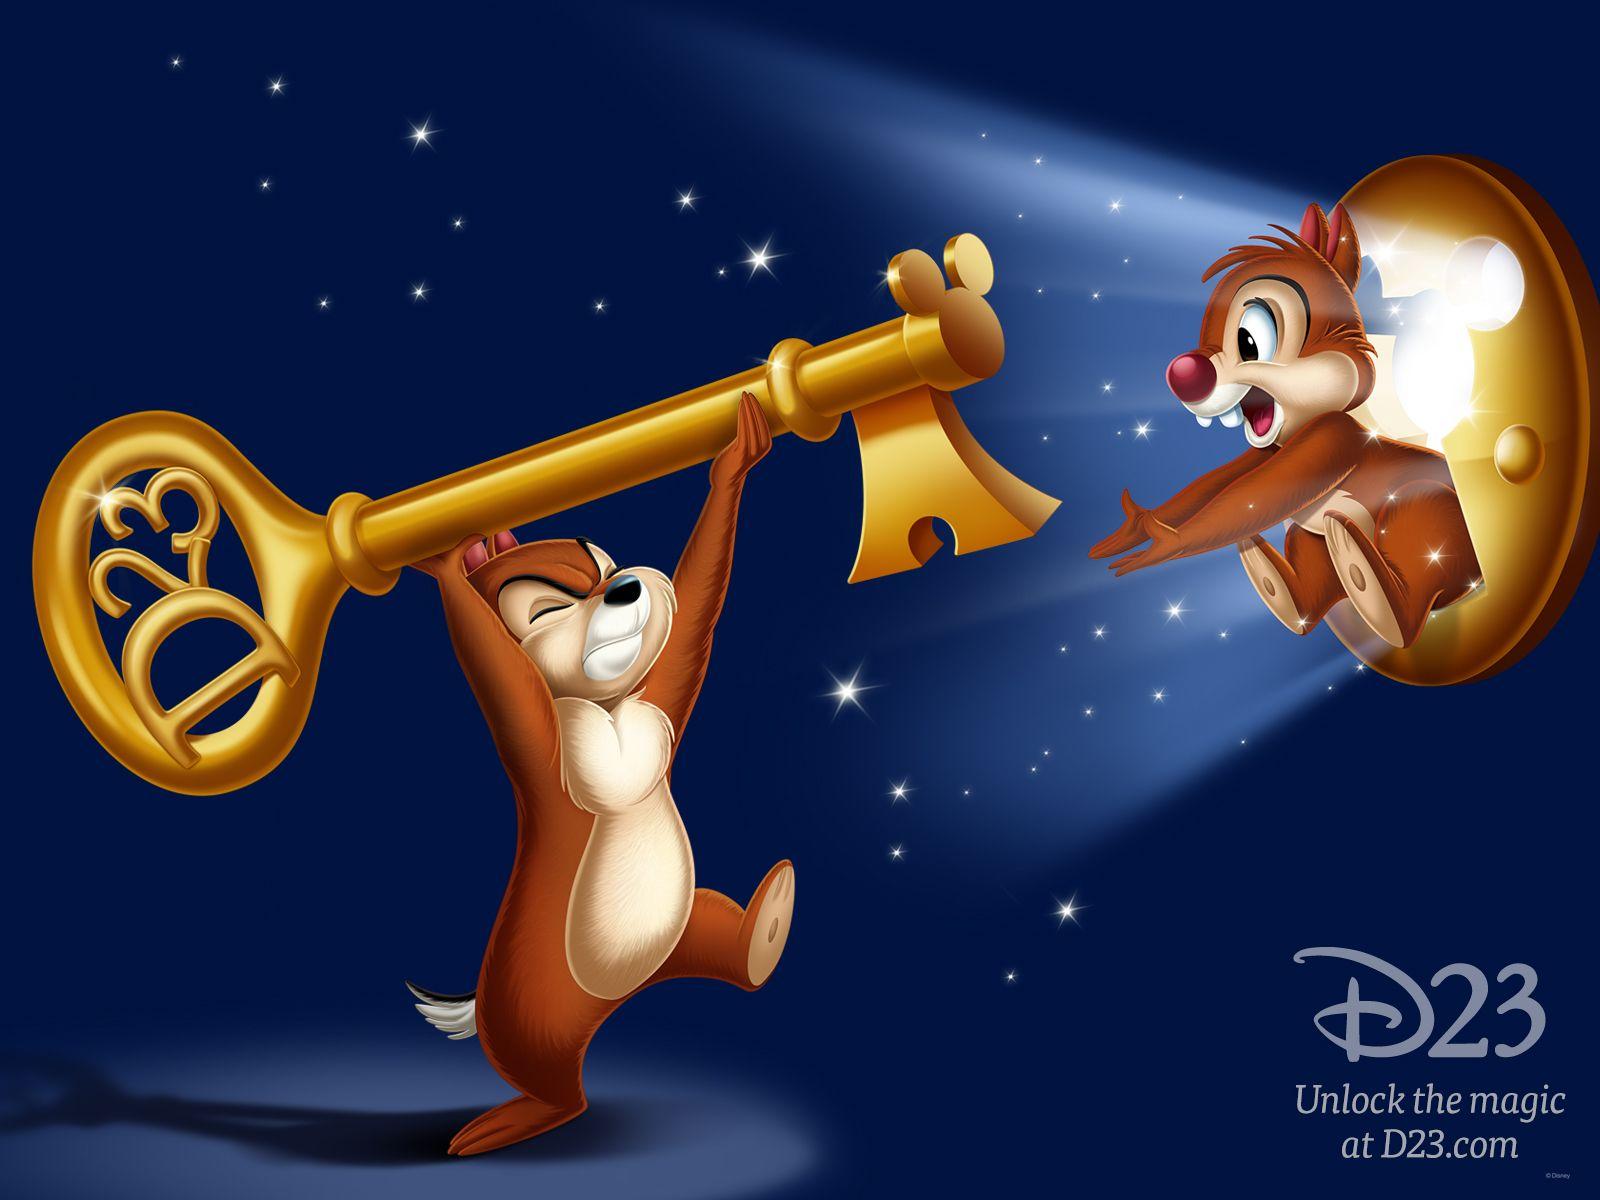 Chip N Dale Wallpaper, HDQ Chip N Dale Image Collection